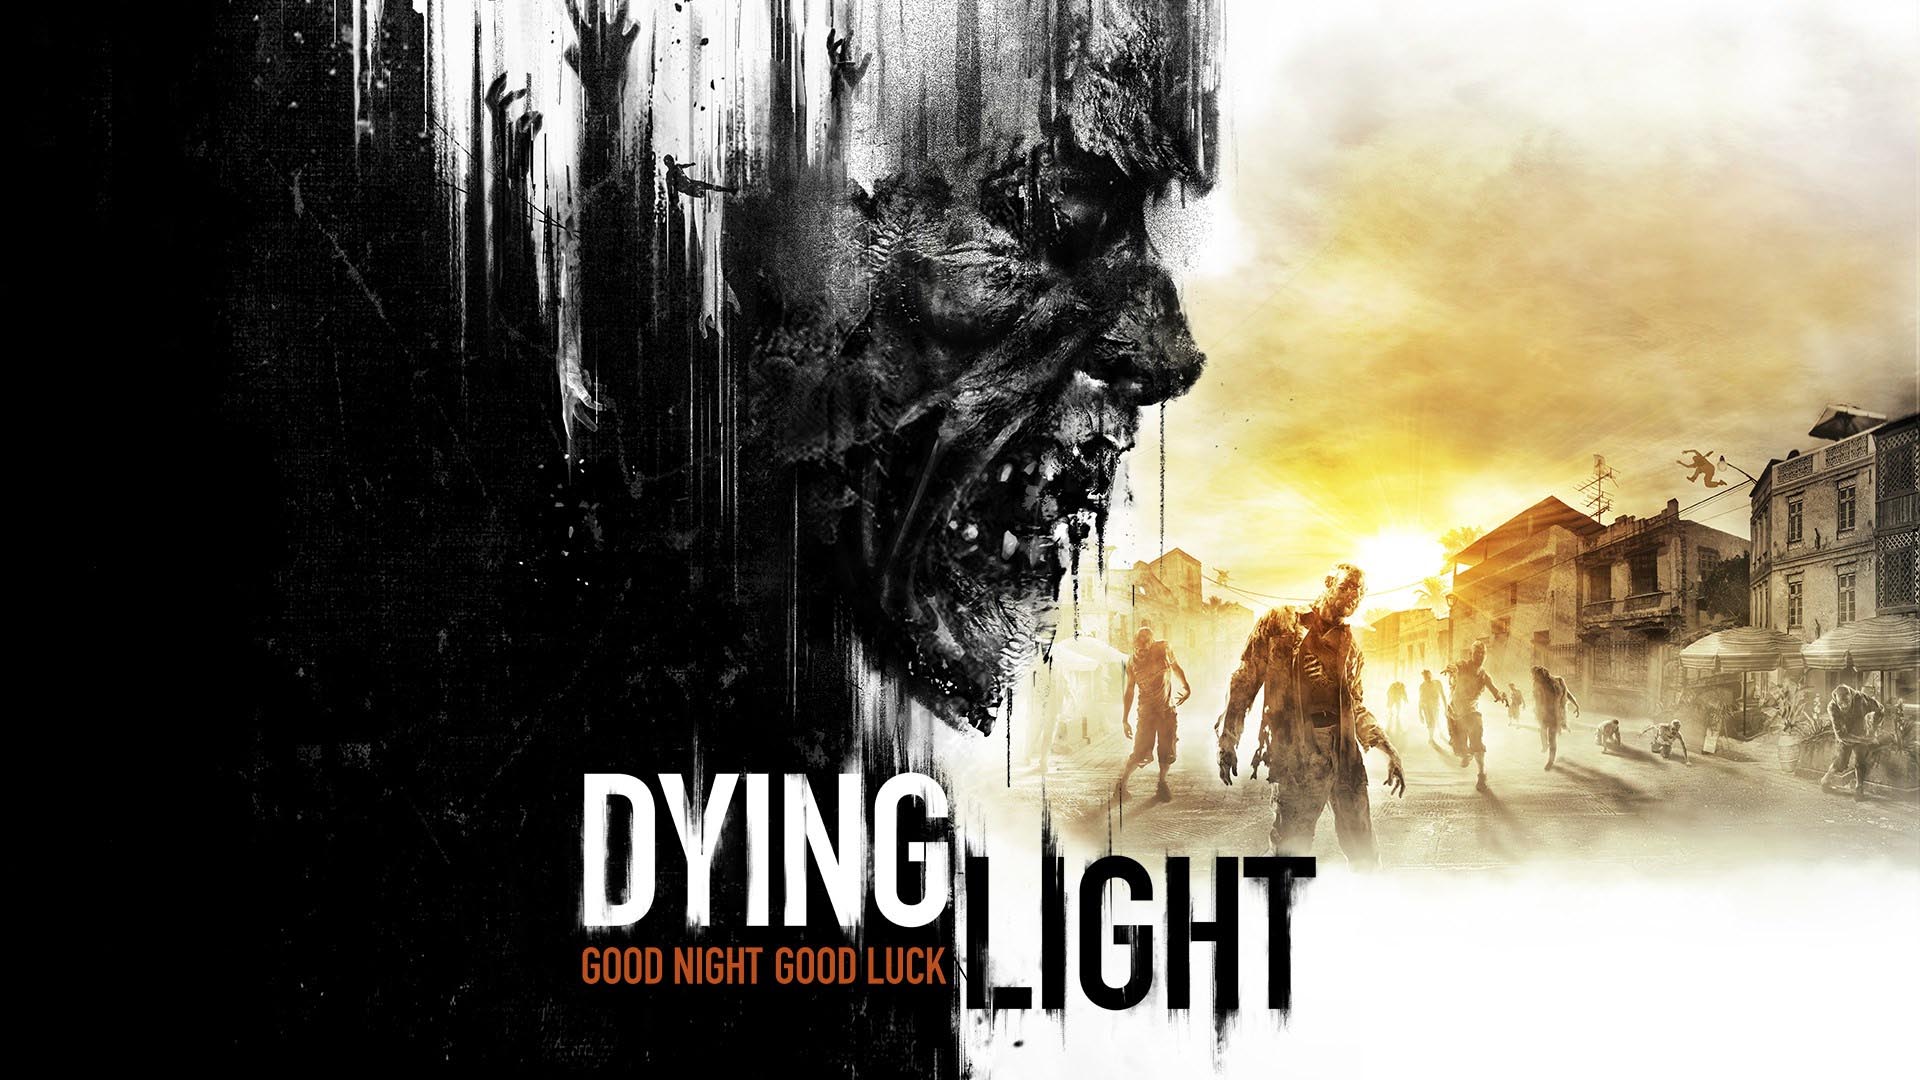 Dying Light Underrated Game?